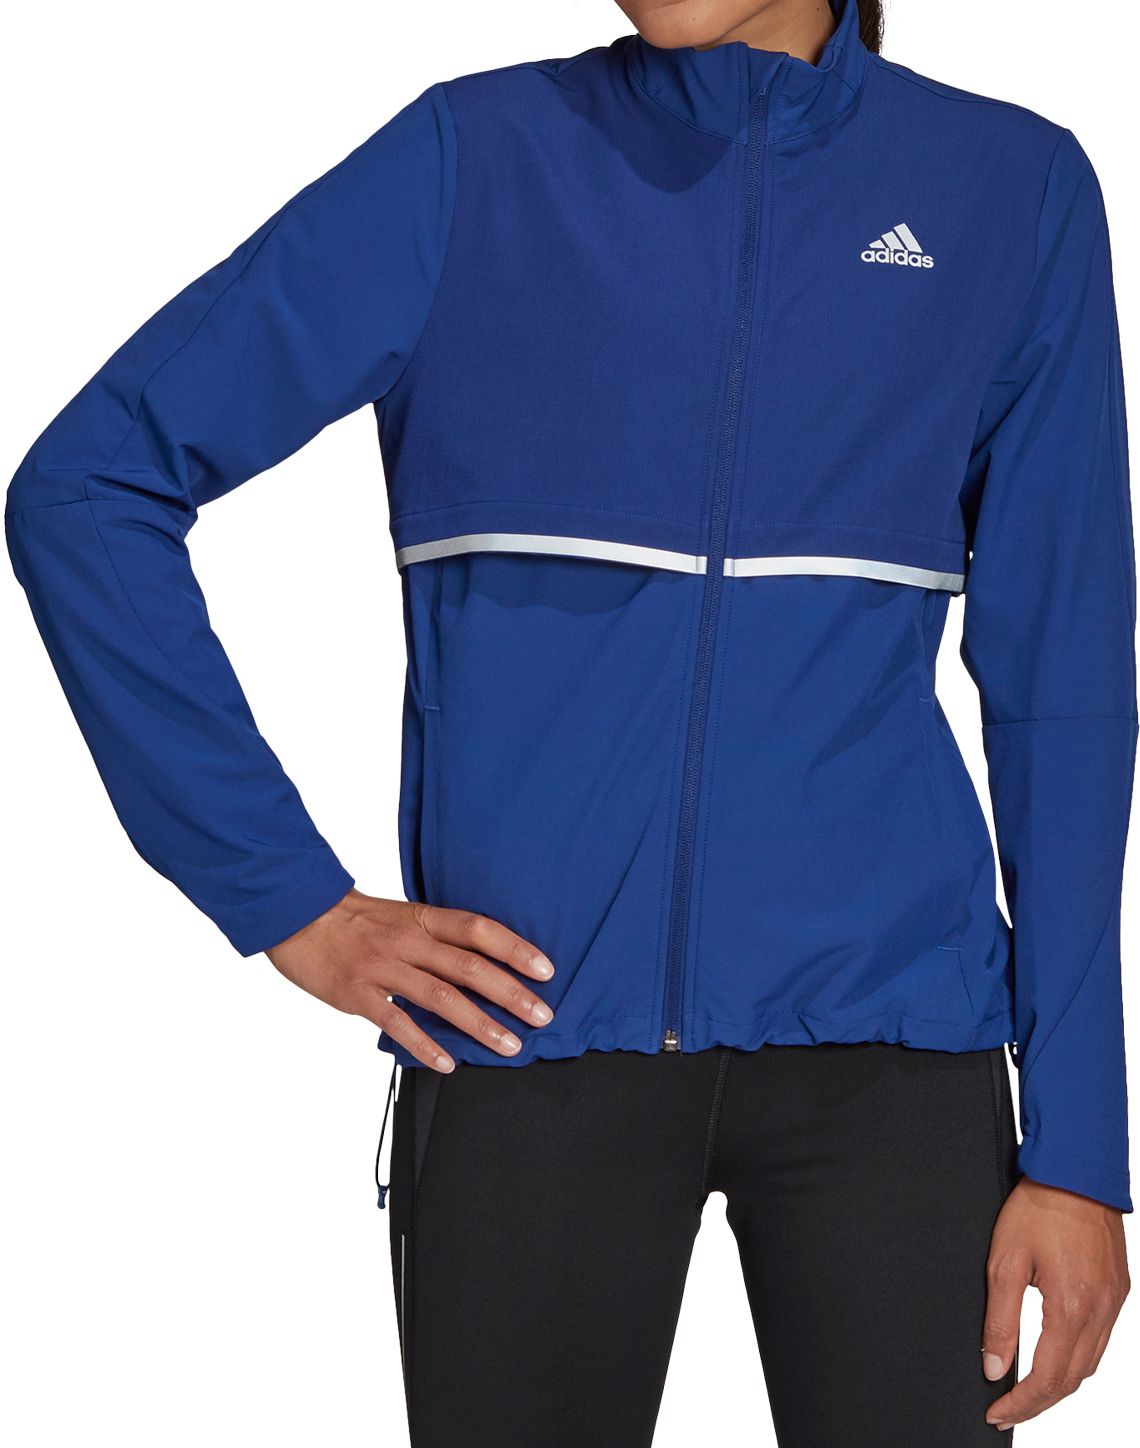 Blue adidas Jackets | DICK'S Sporting Goods